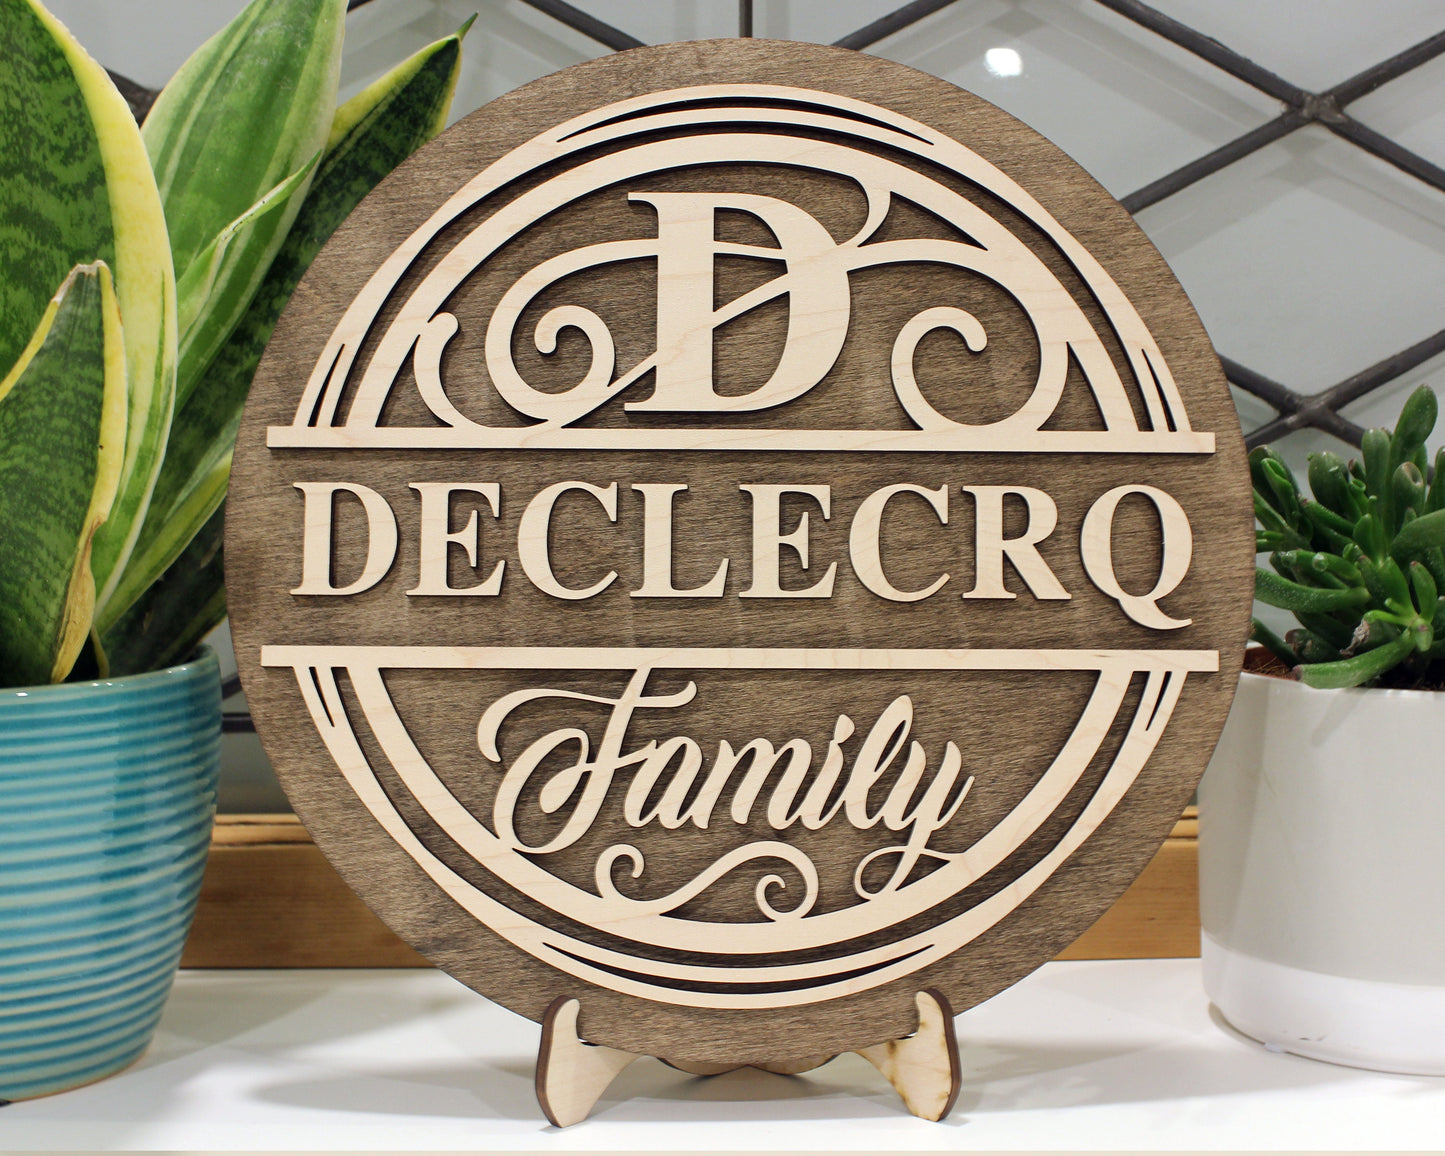 Personalized Home Signage Set - 10 Designs Included - 260 files - Built in Template - SVG File Download - Sized for Glowforge